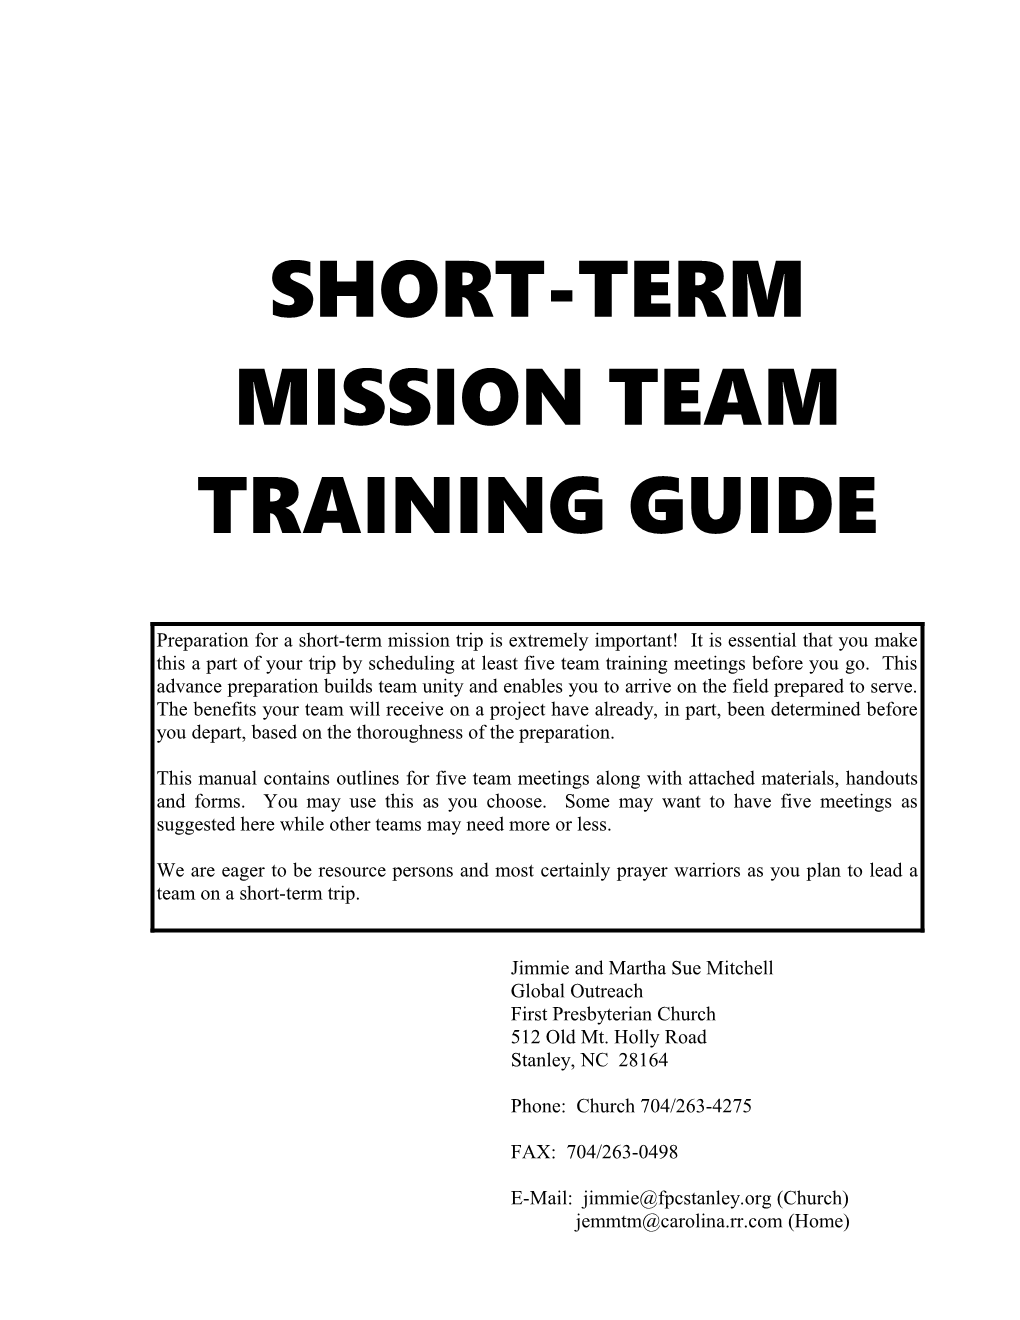 Short-Term Mission Team Training Guide